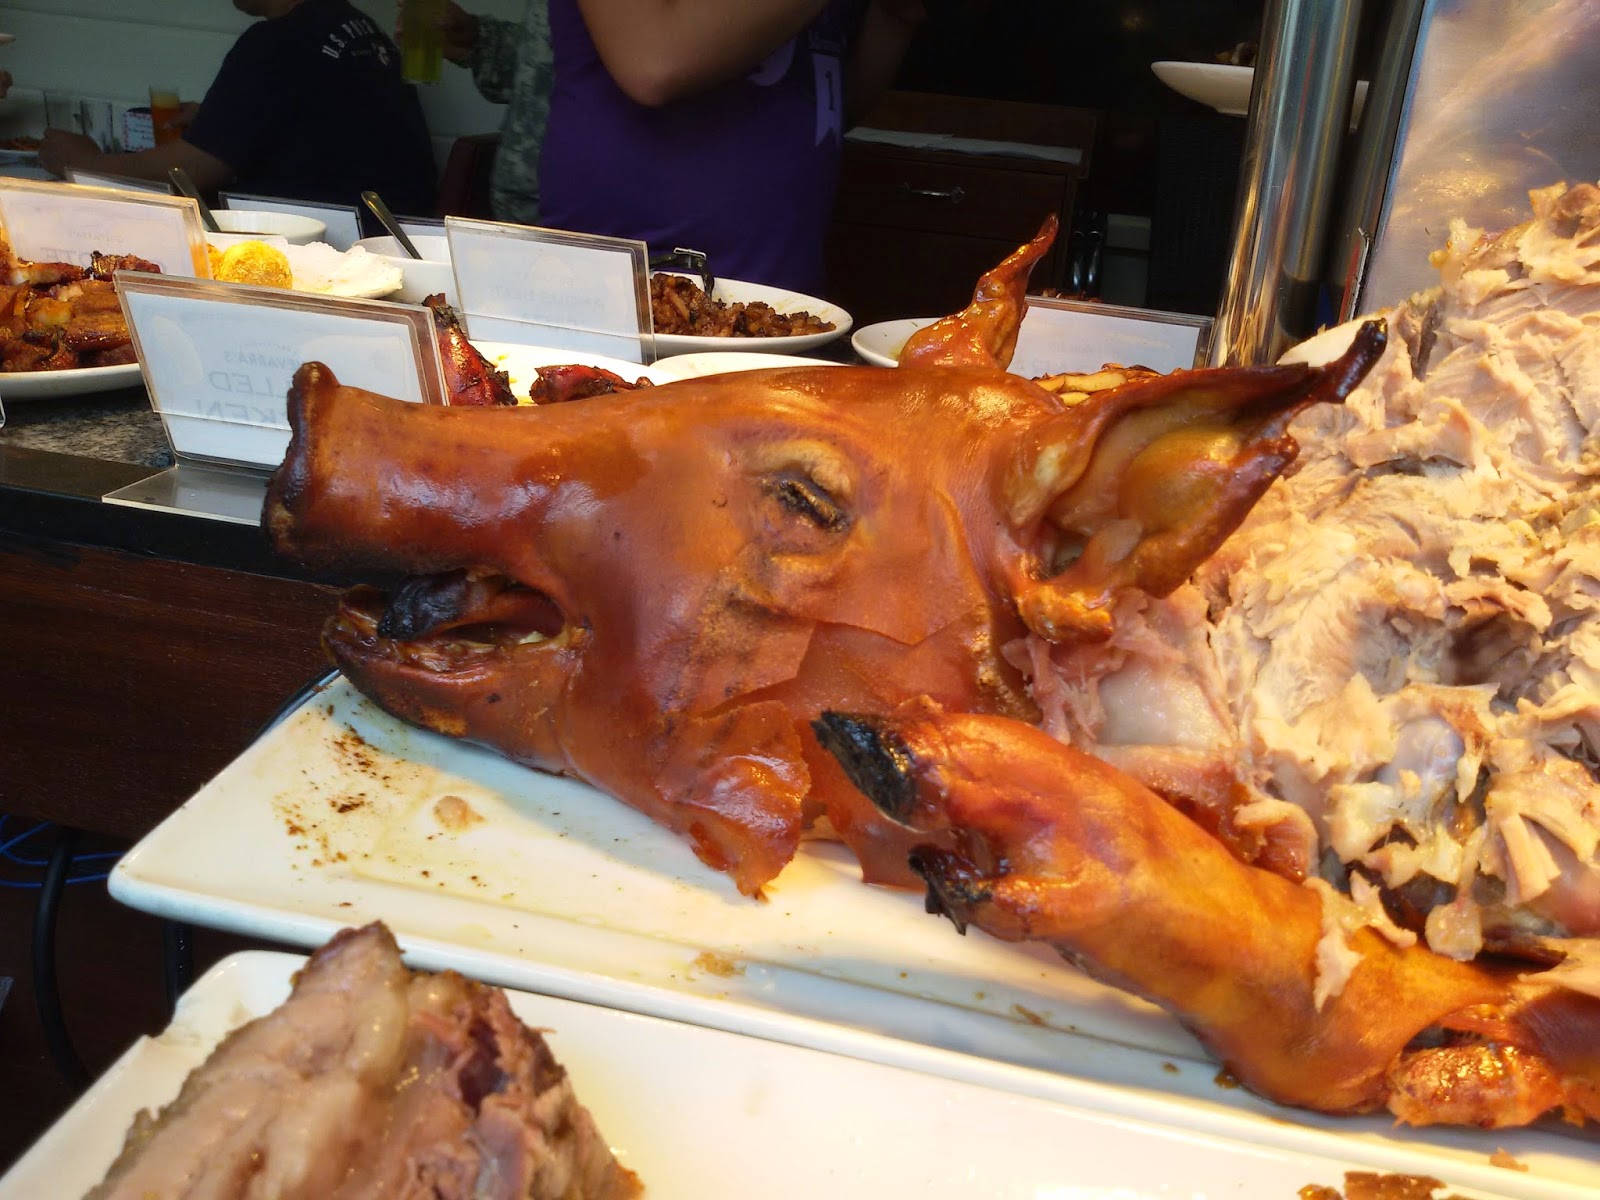 Chef Laudico Guevarra's Buffet Review